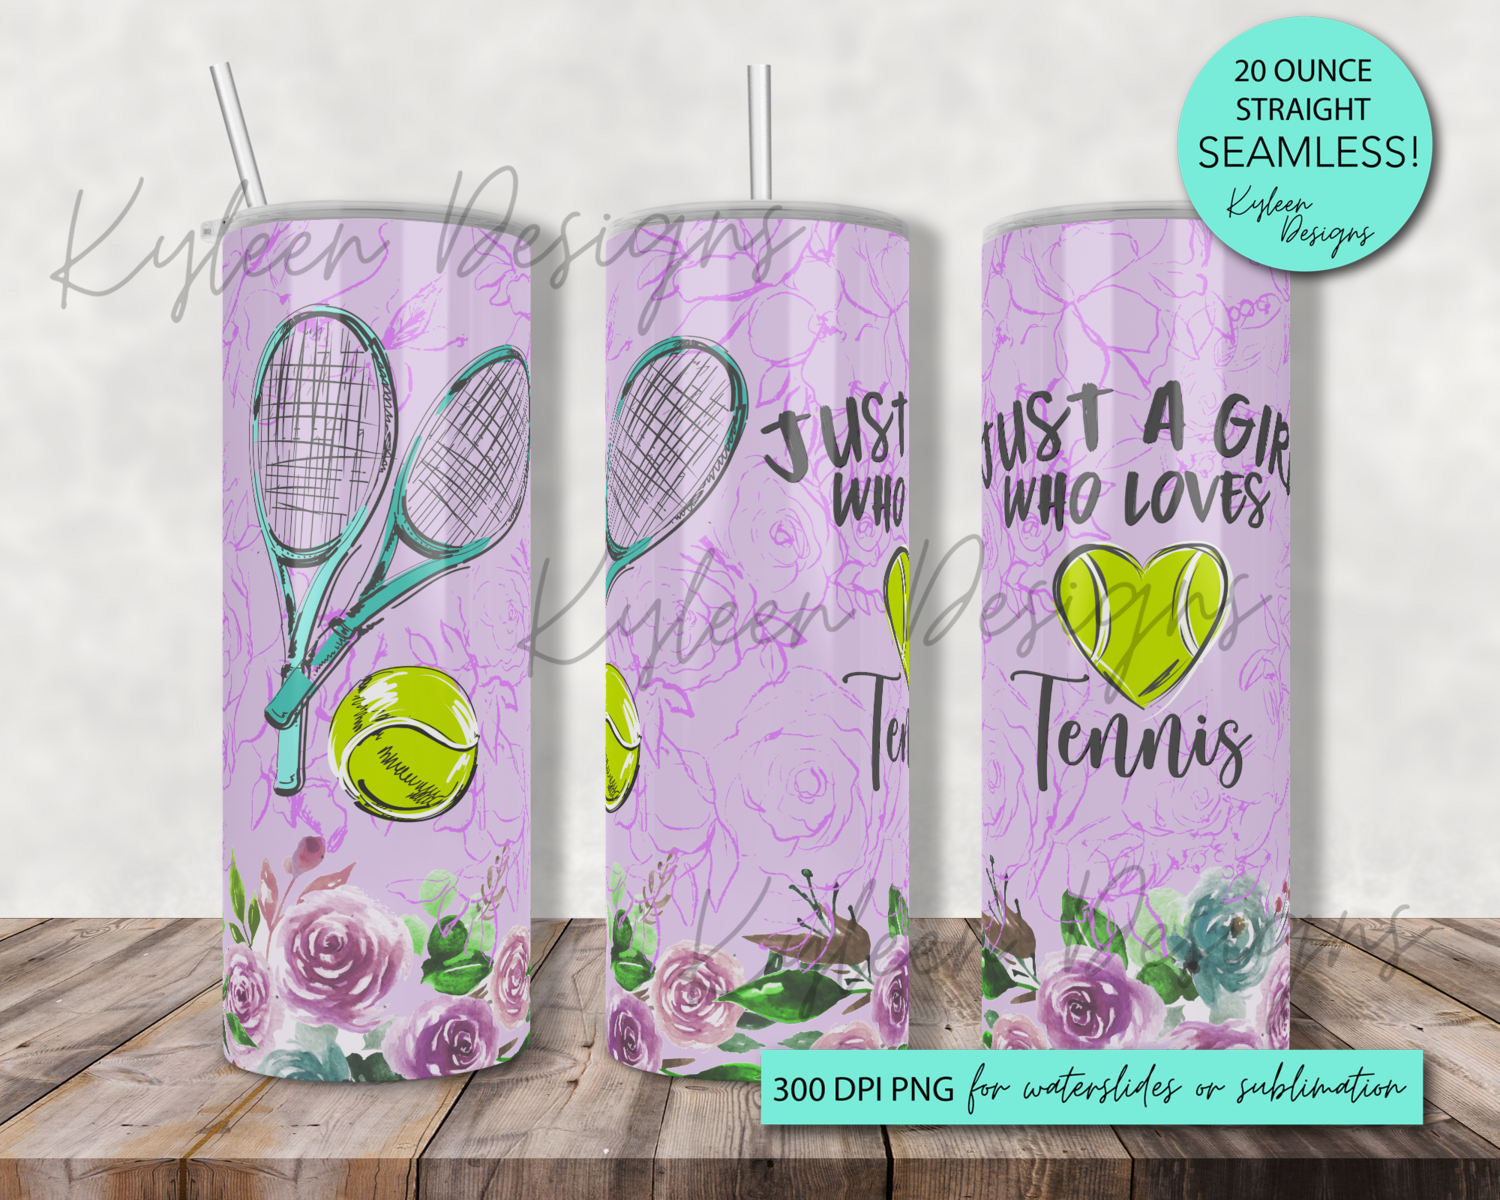 20 ounce just a girl who loves tennis print wrap for sublimation, waterslide High res PNG digital file